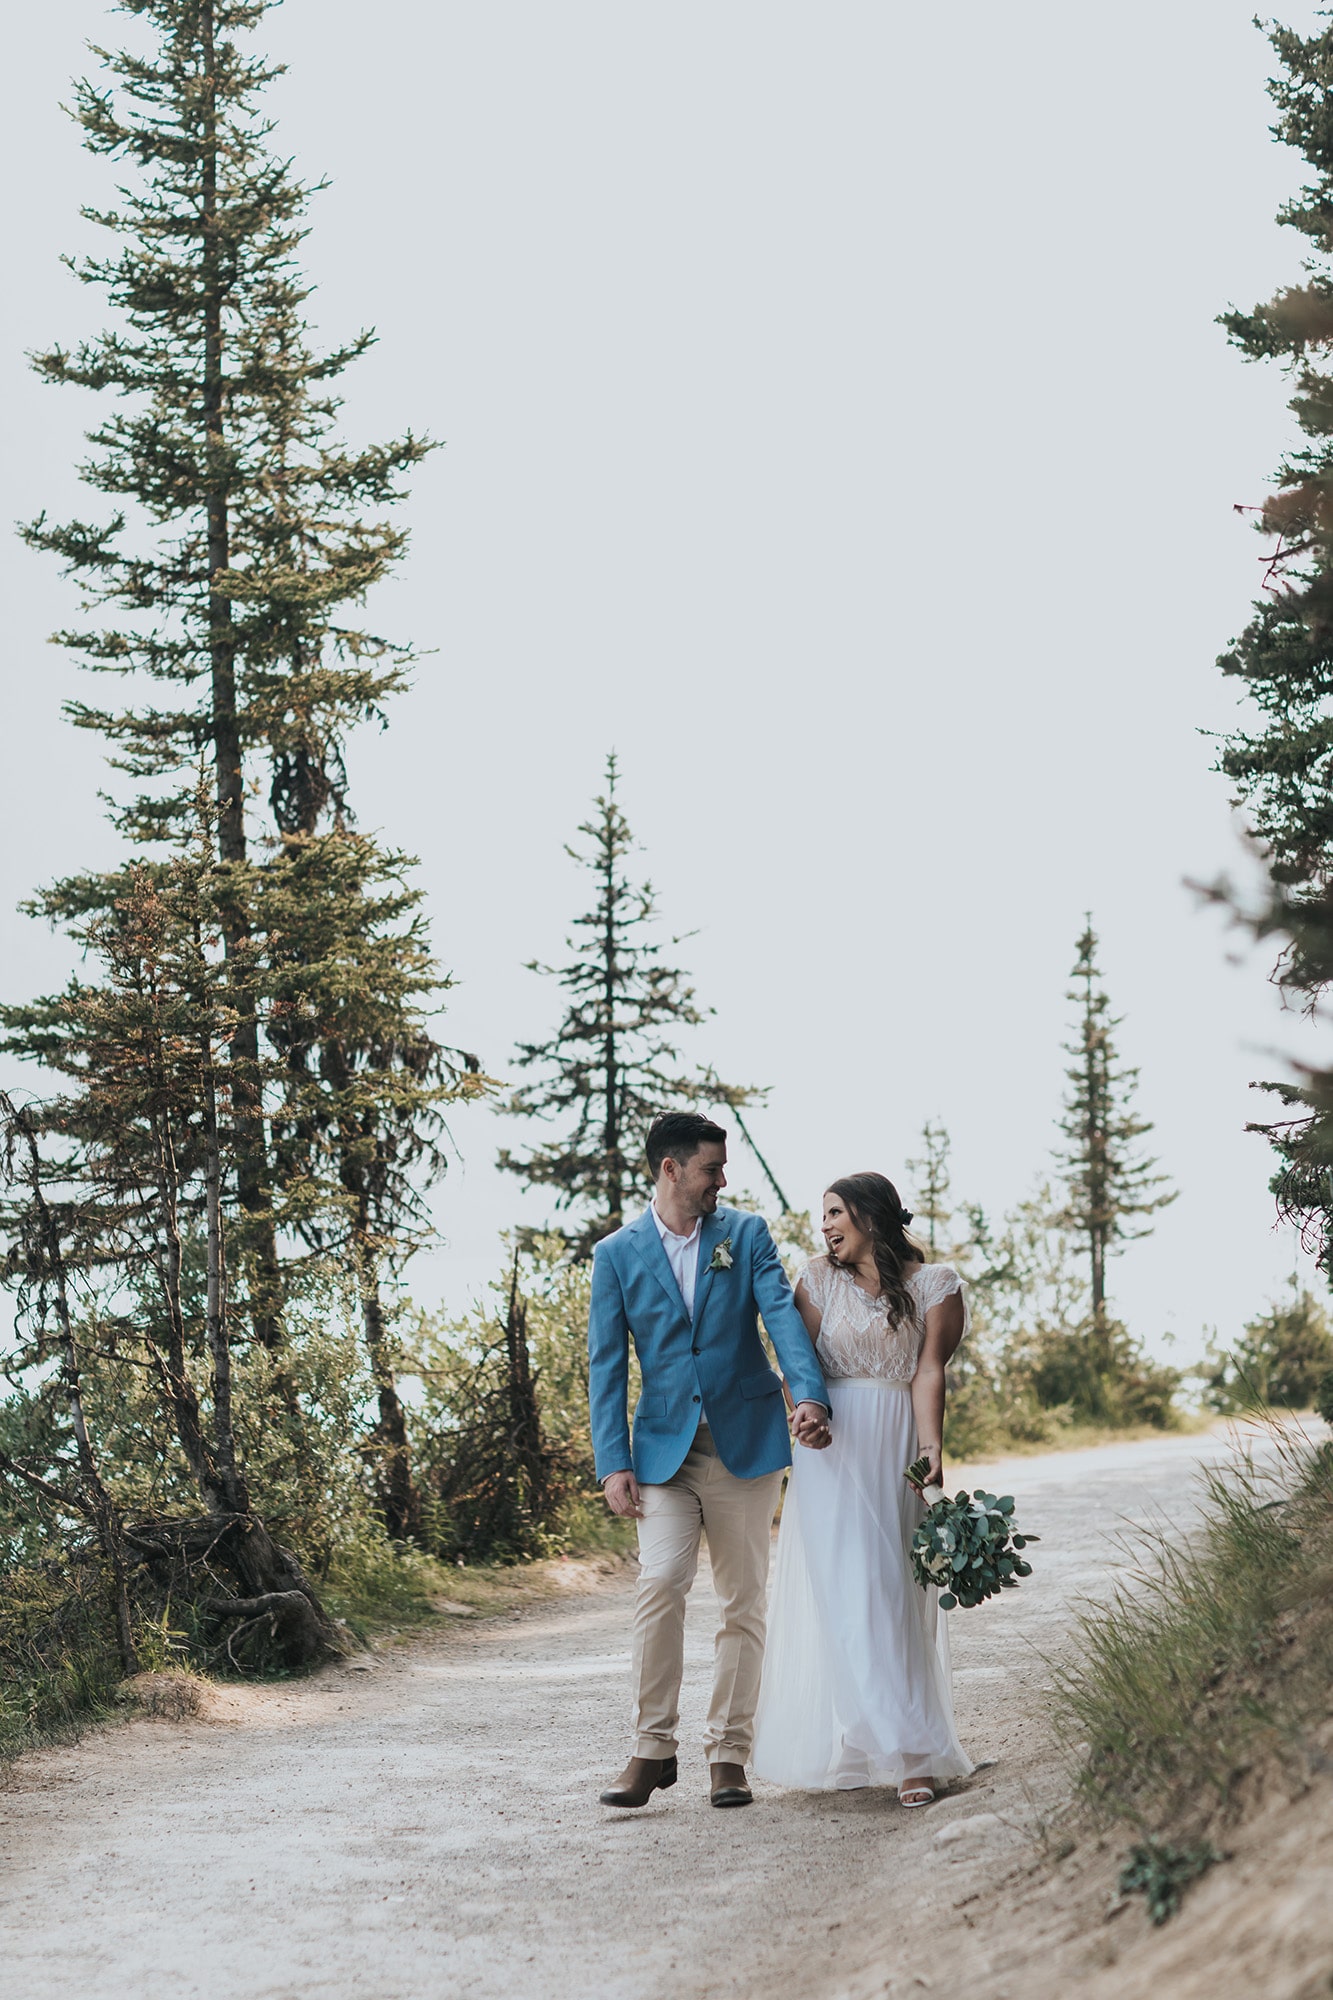 Bride & Groom Walking the wooded trail during wildfire season in the Canadian Rockies